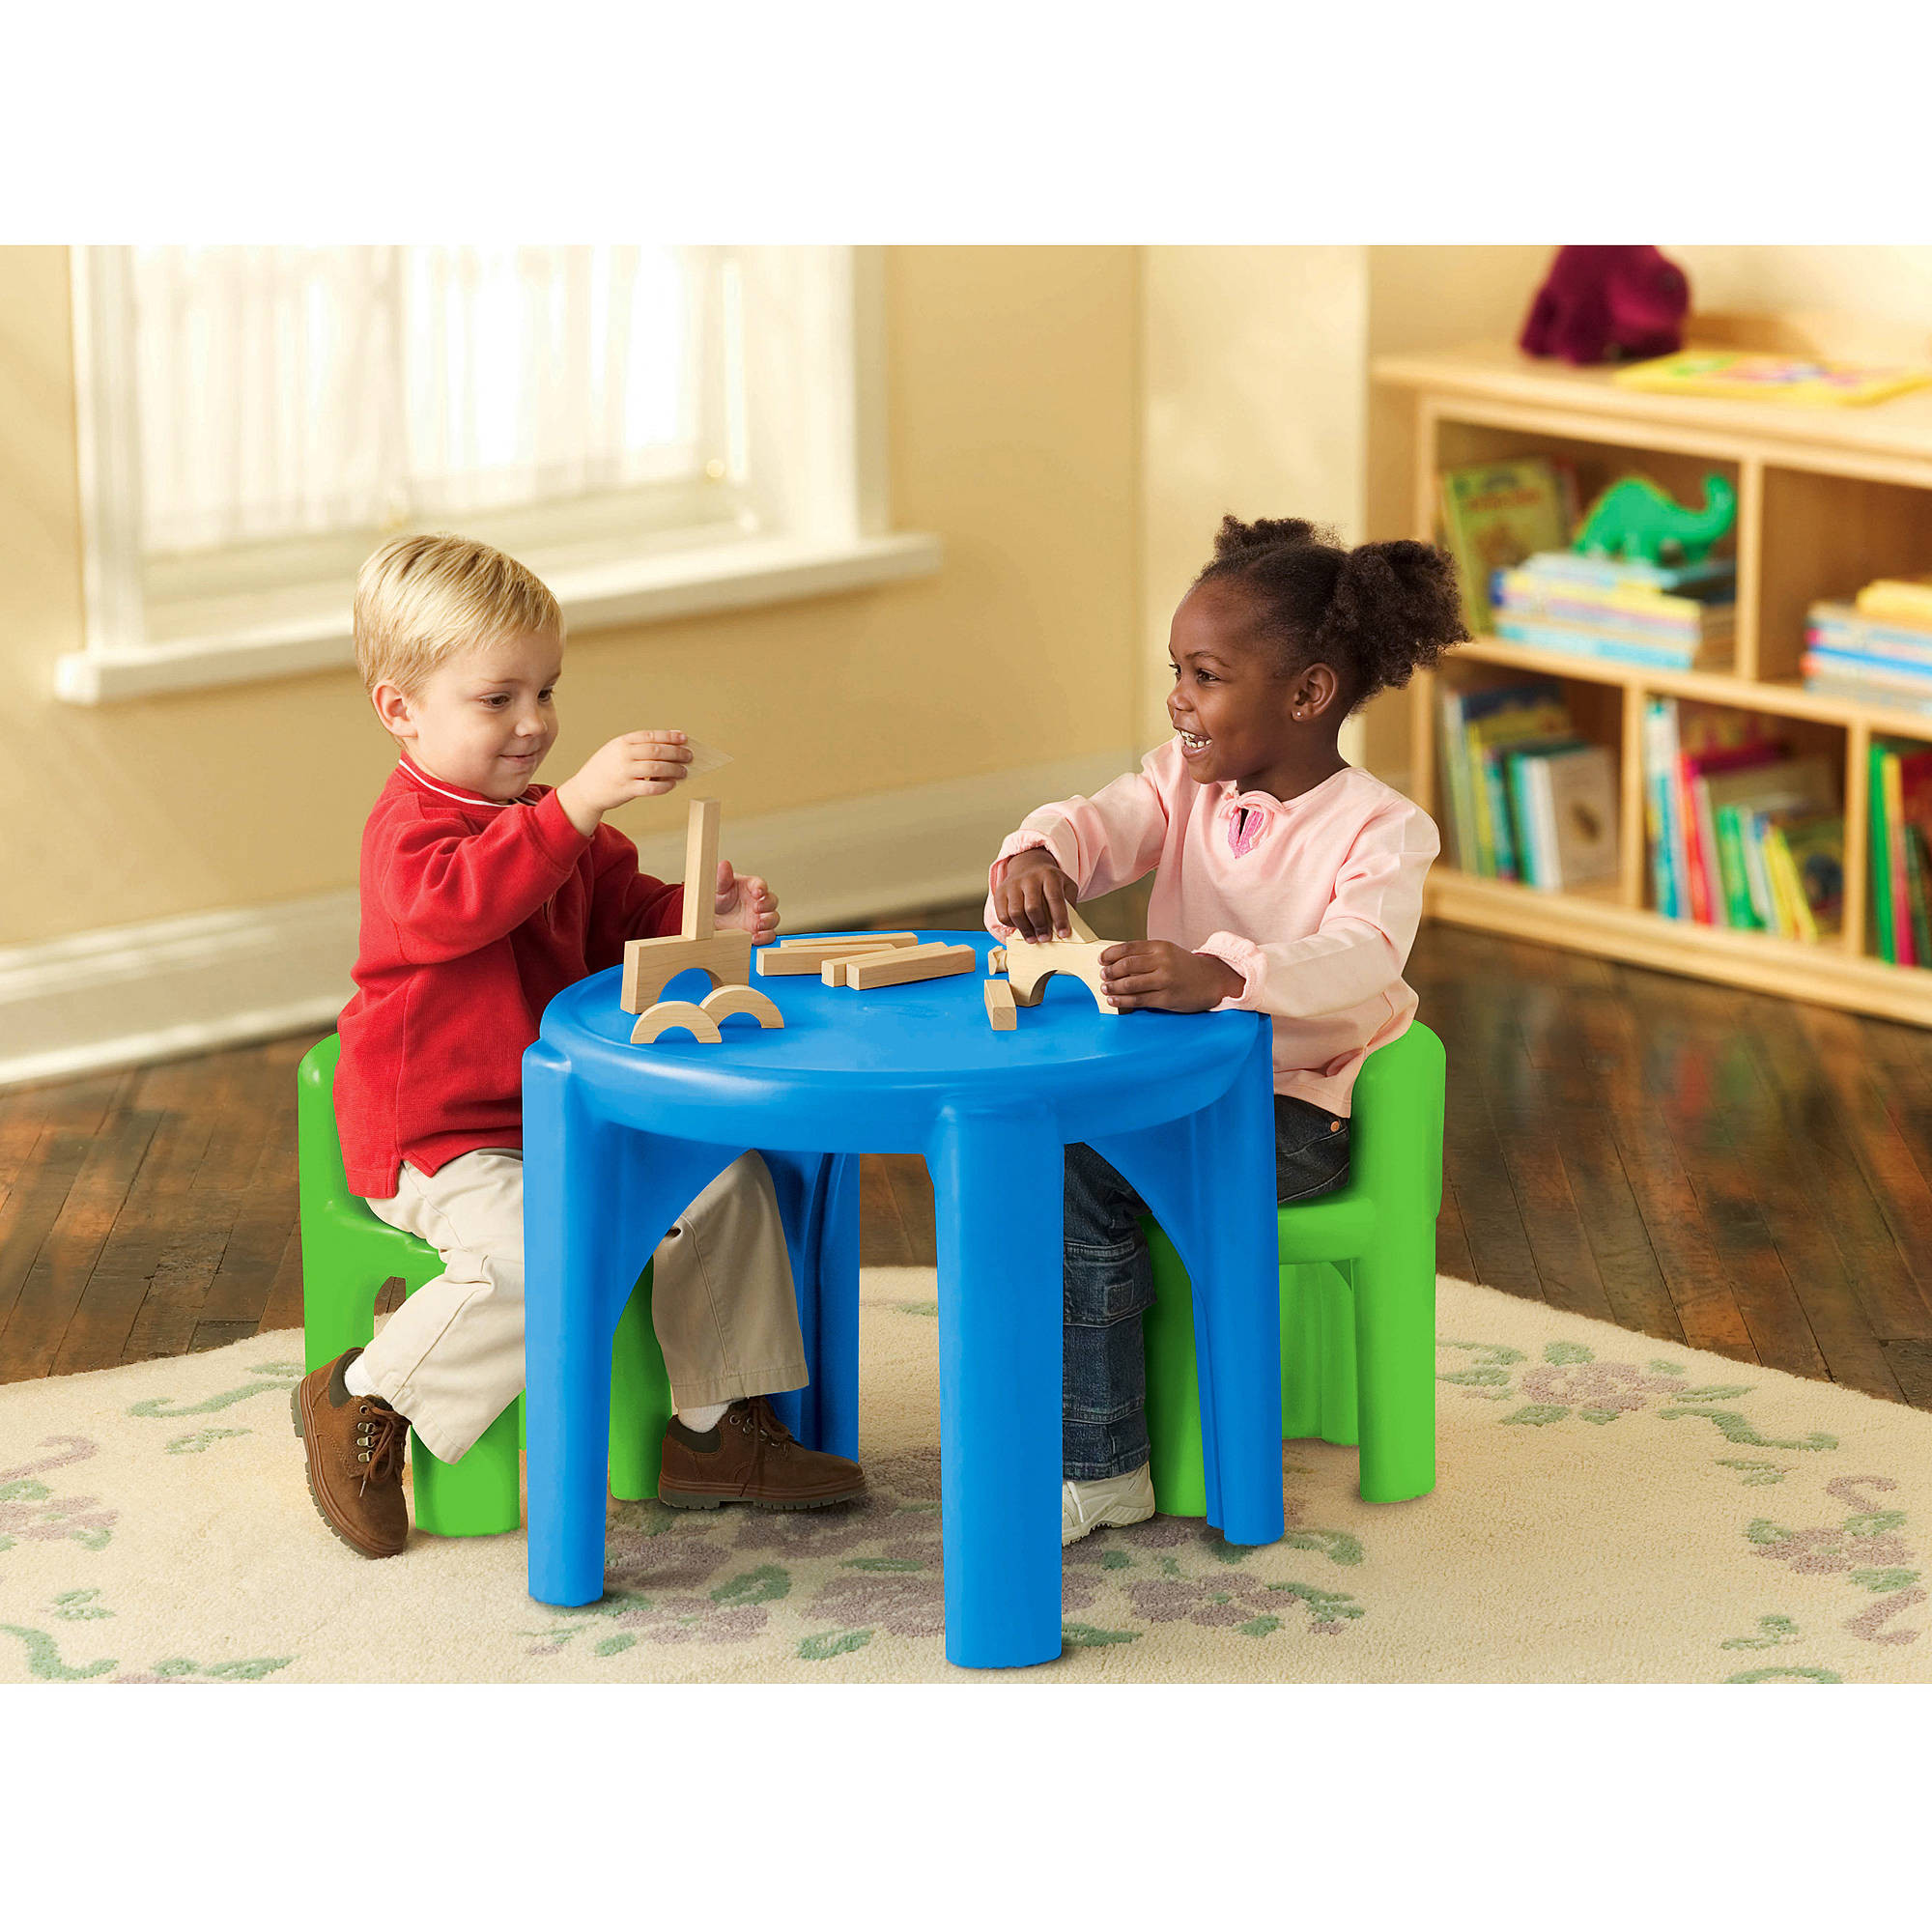 Kids Table And Chairs Walmart
 Little Tikes Table and Chair Set Multiple Colors Green